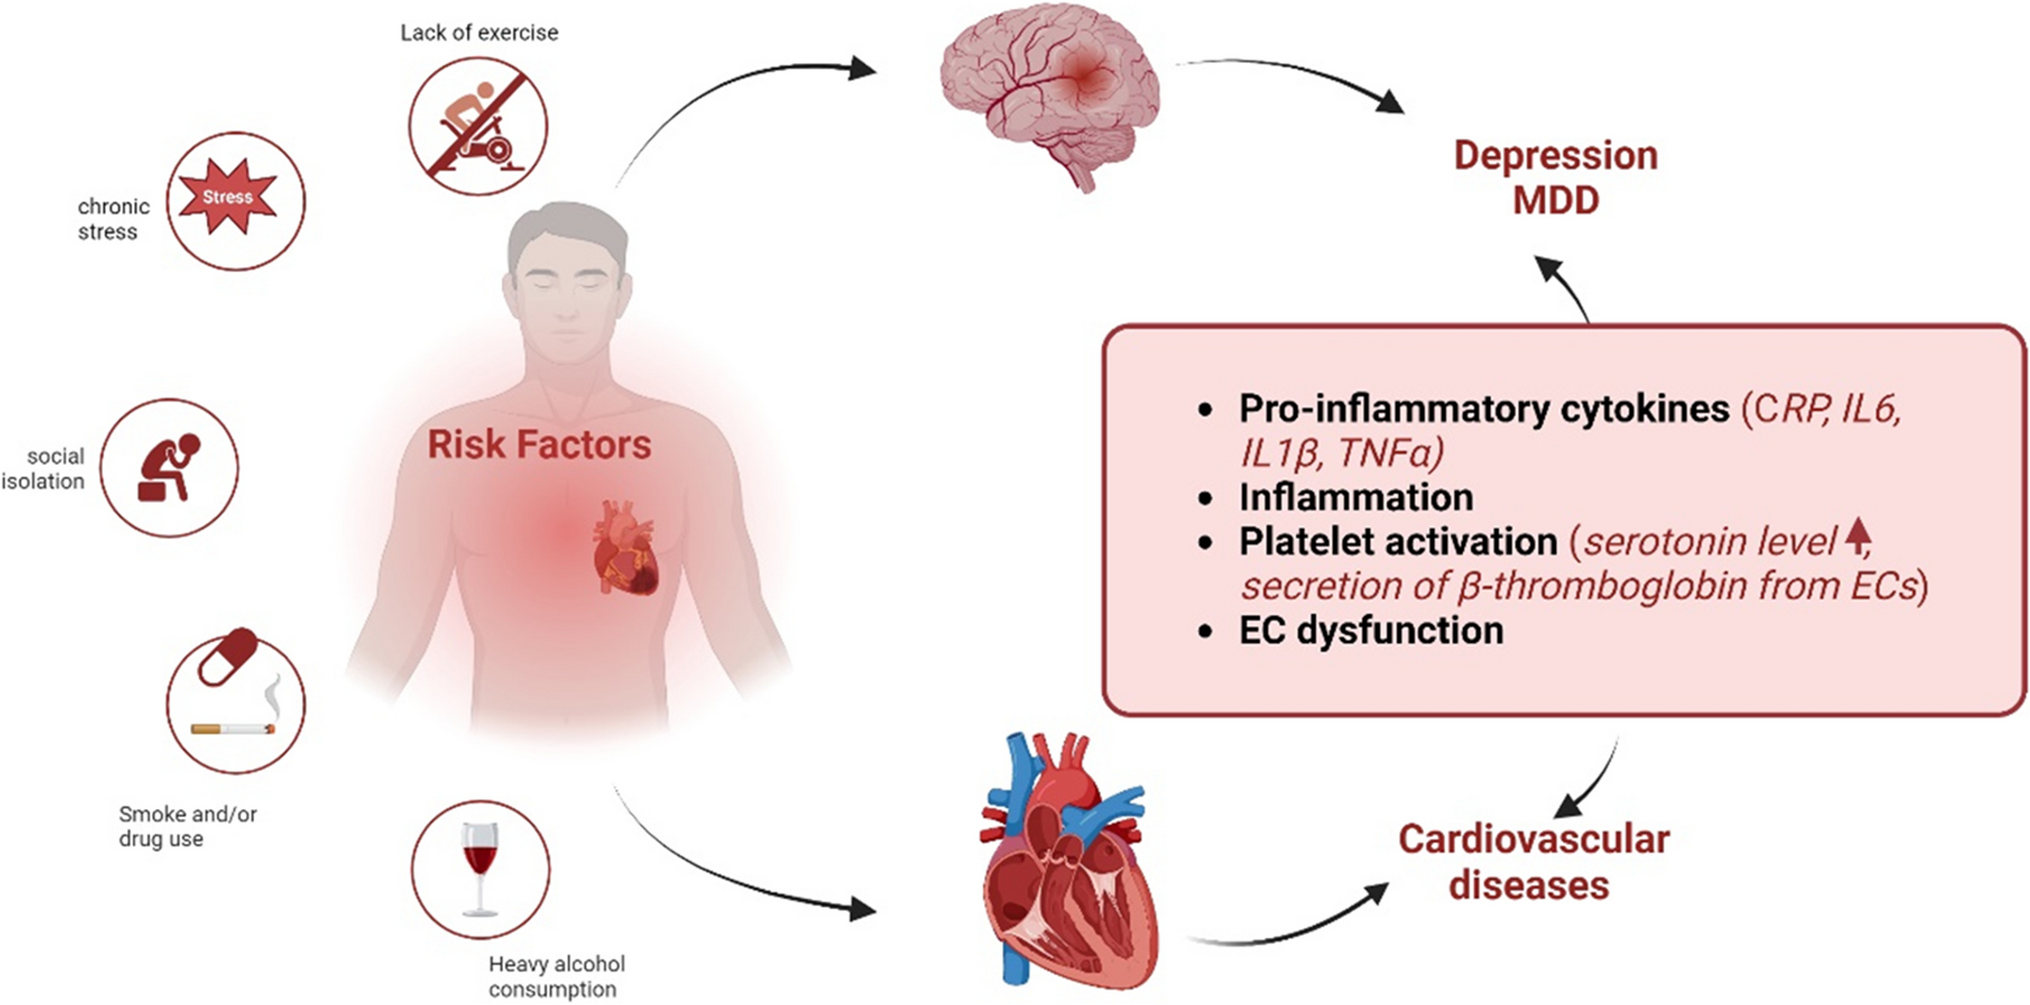 A Potential Role for MAGI-1 in the Bi-Directional Relationship Between Major Depressive Disorder and Cardiovascular Disease